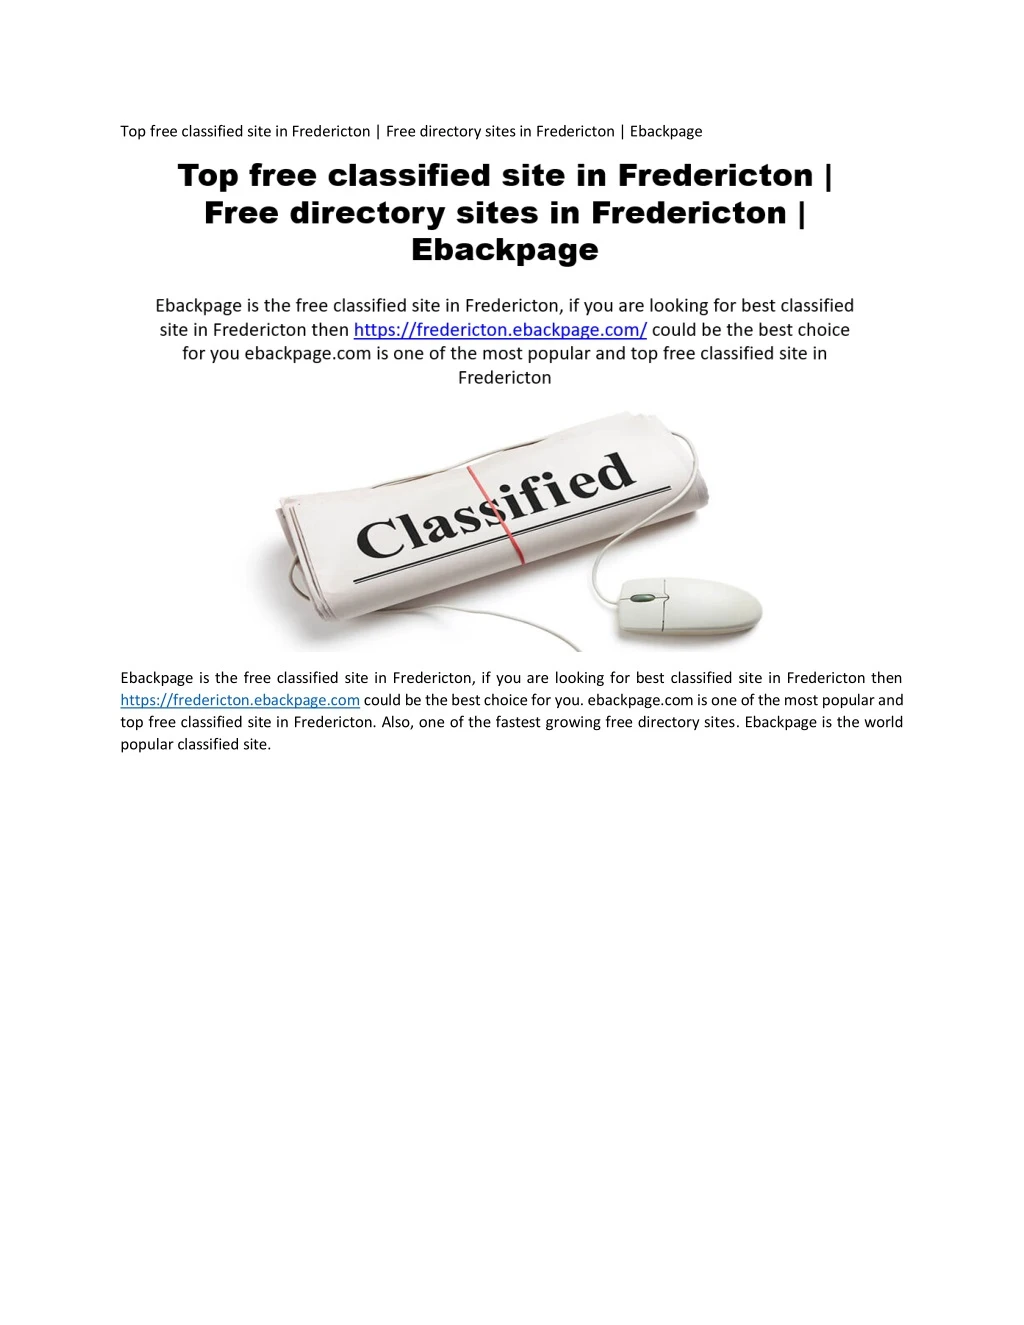 top free classified site in fredericton free